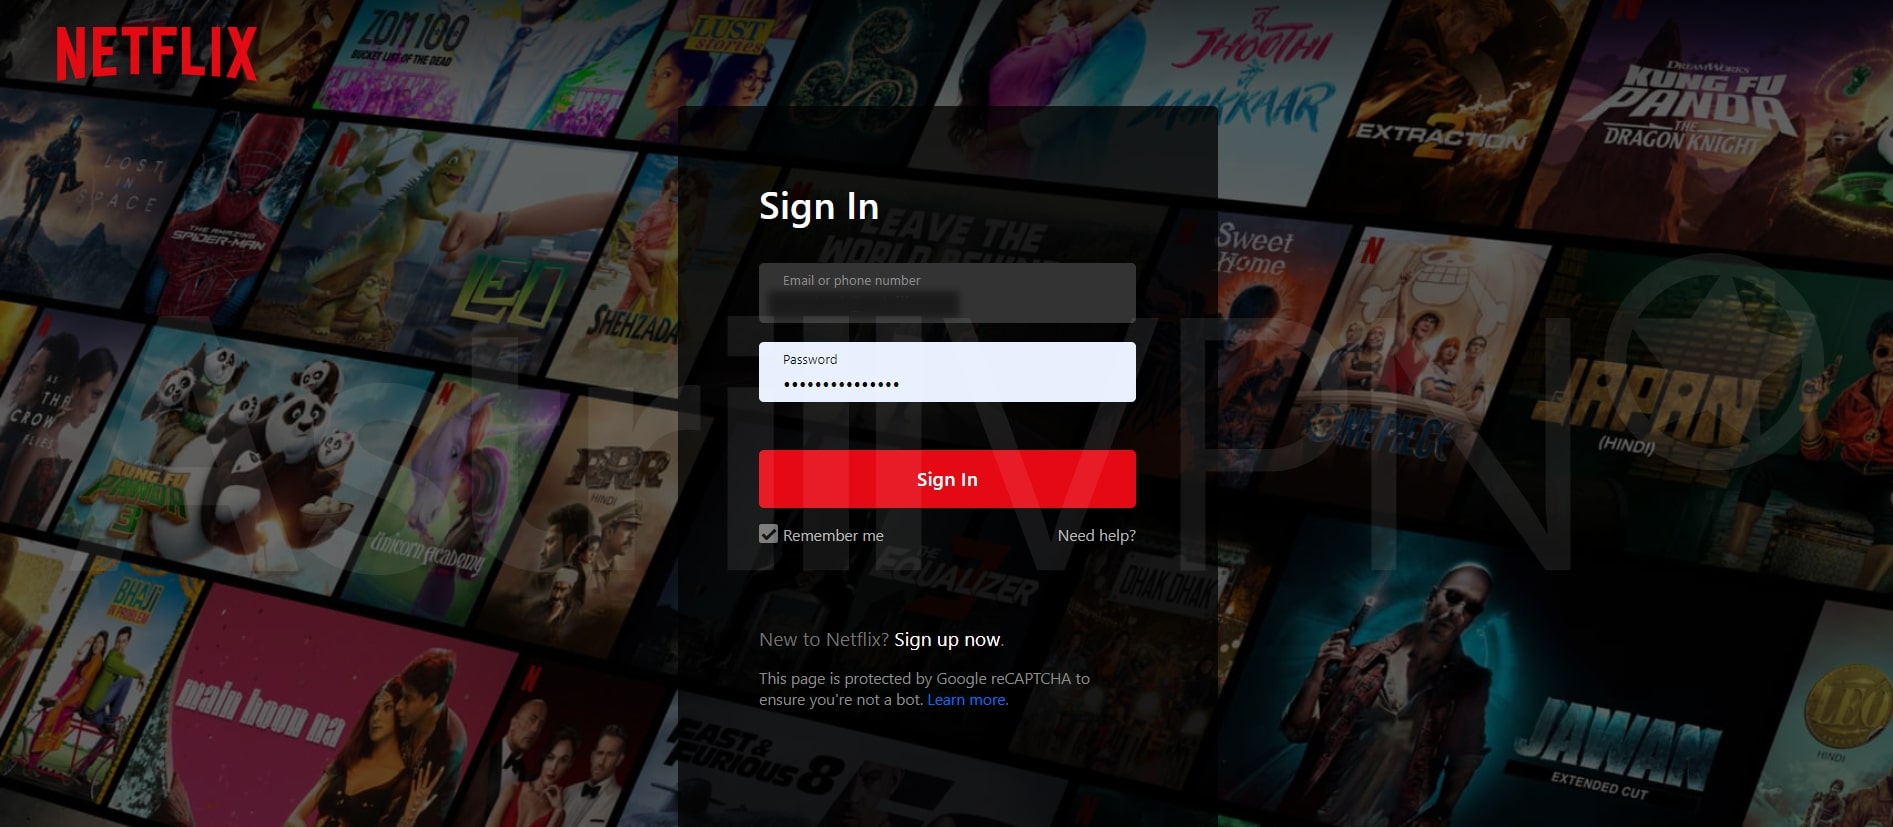 Nеtflix account or log in